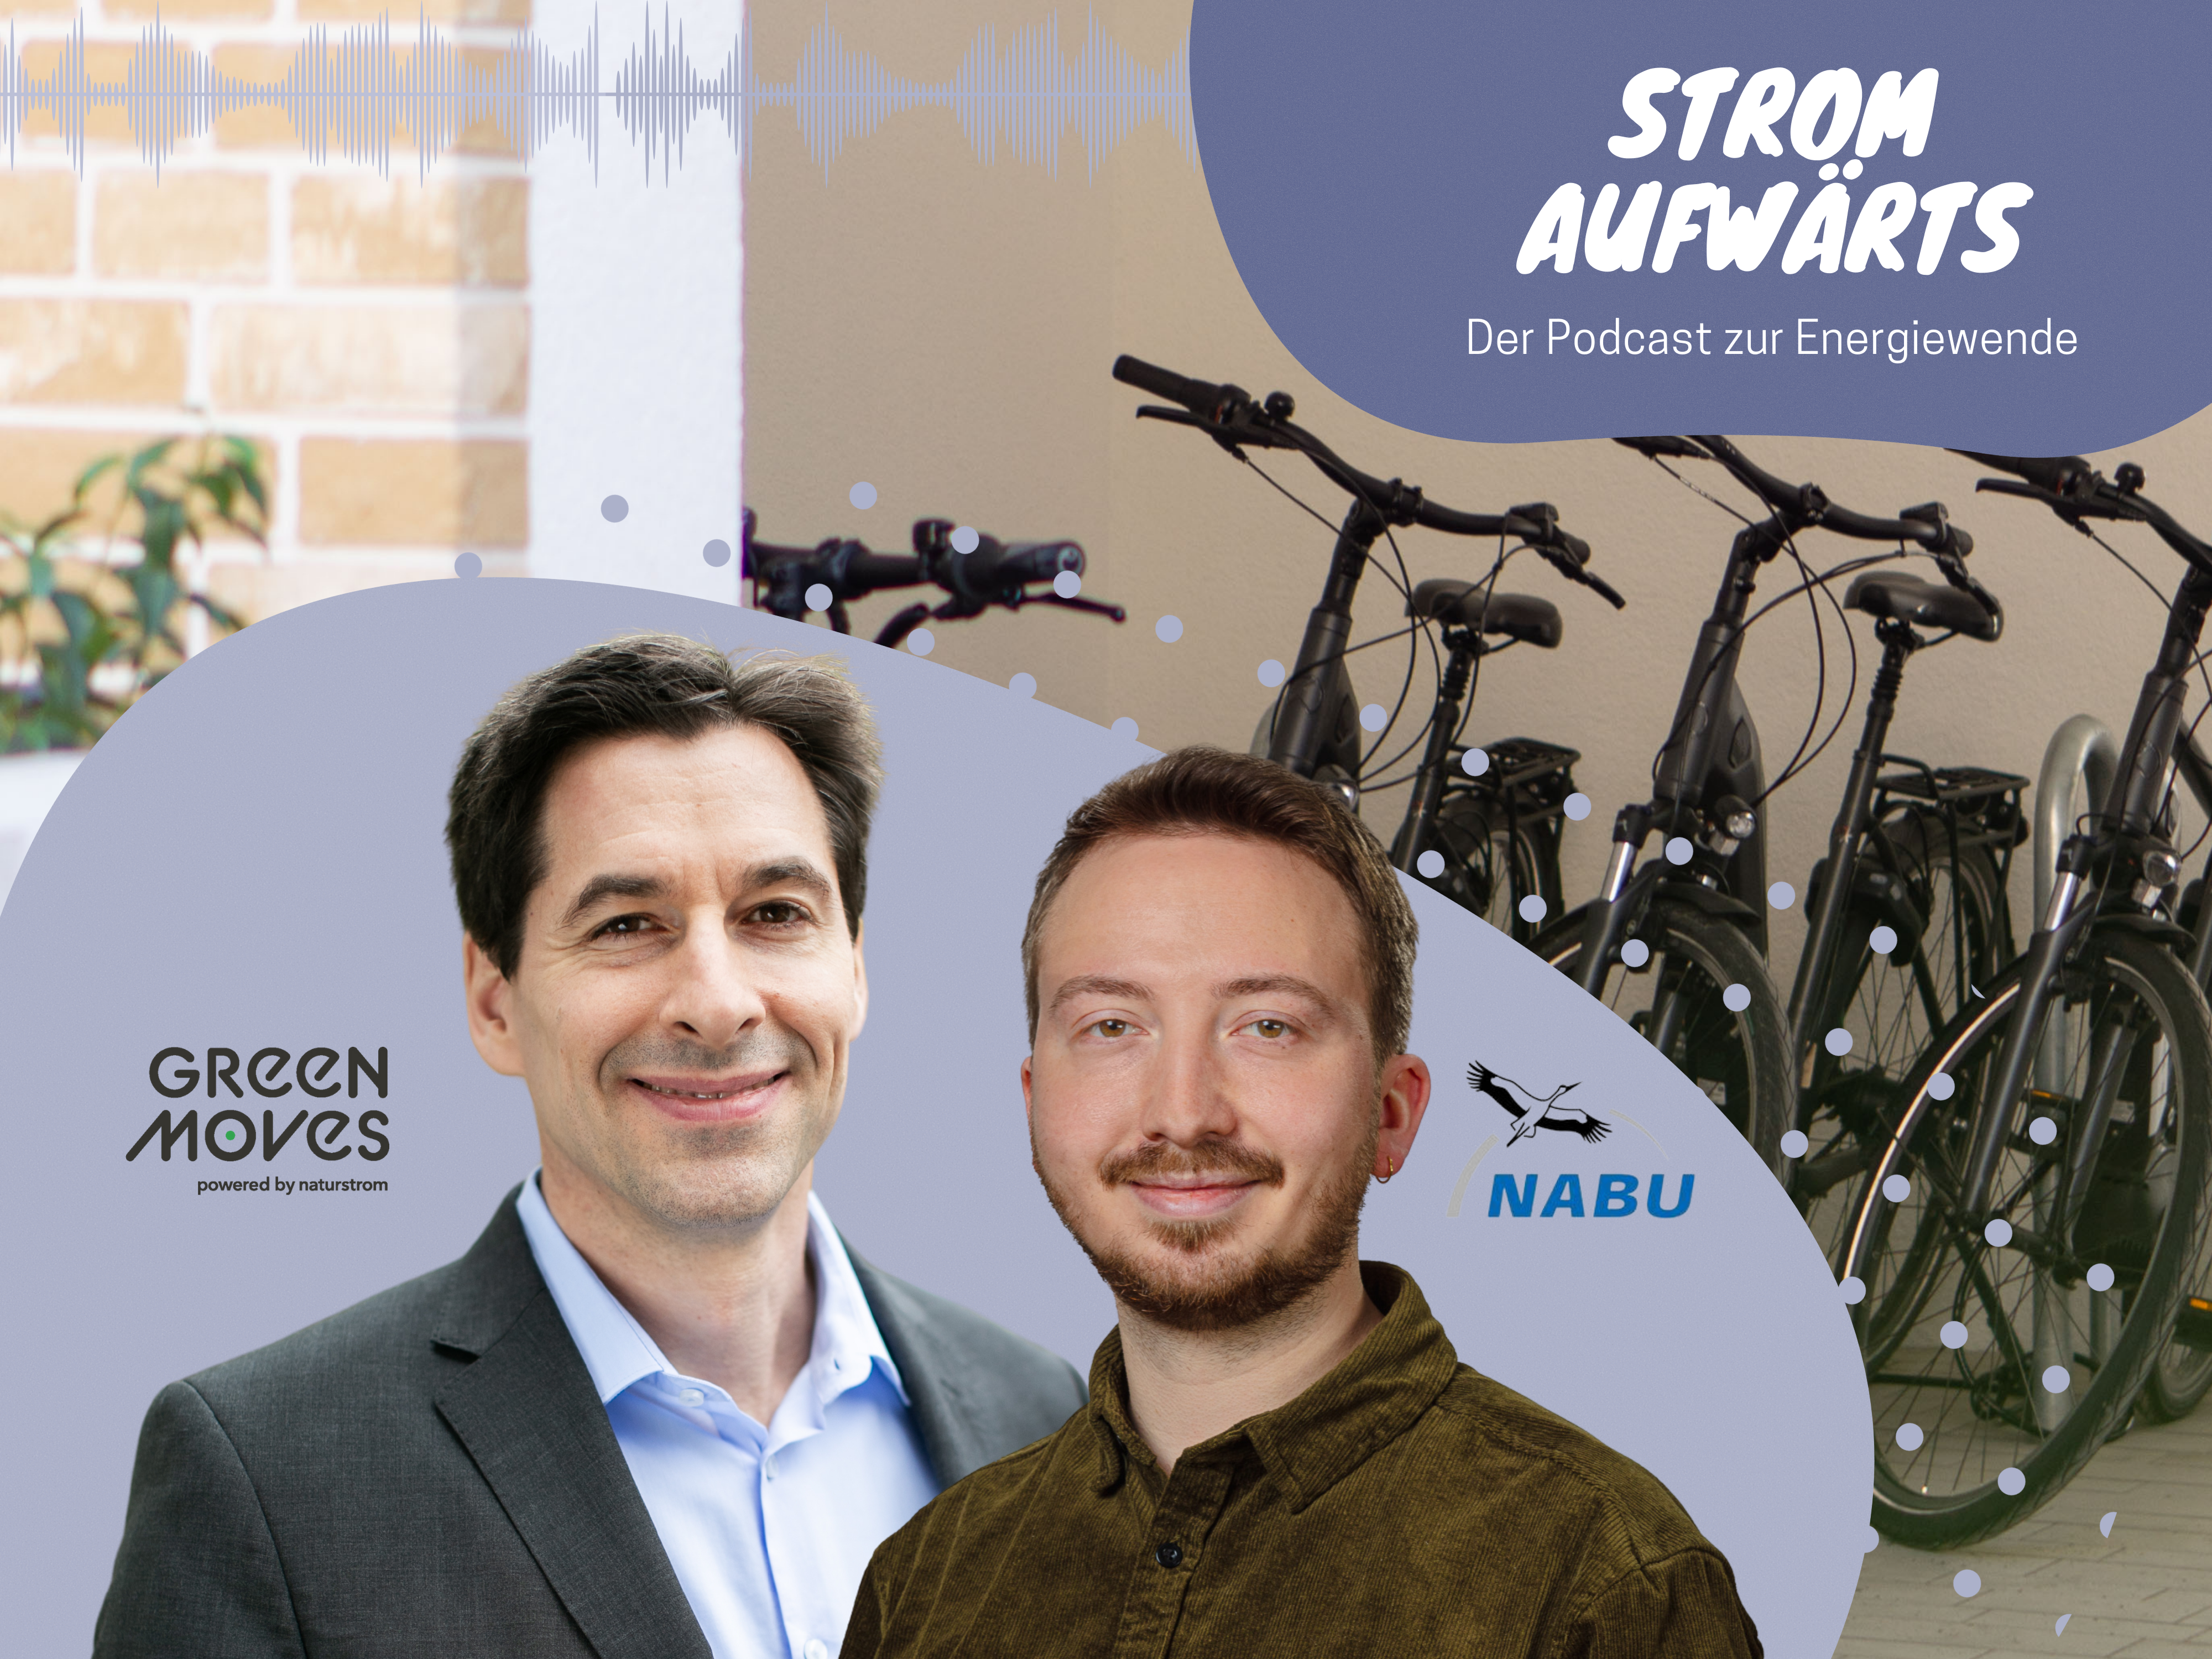 Podcast guests Ernst Raupach from Green Moves and Merlin Jonack from NABU against a backdrop of e-bikes